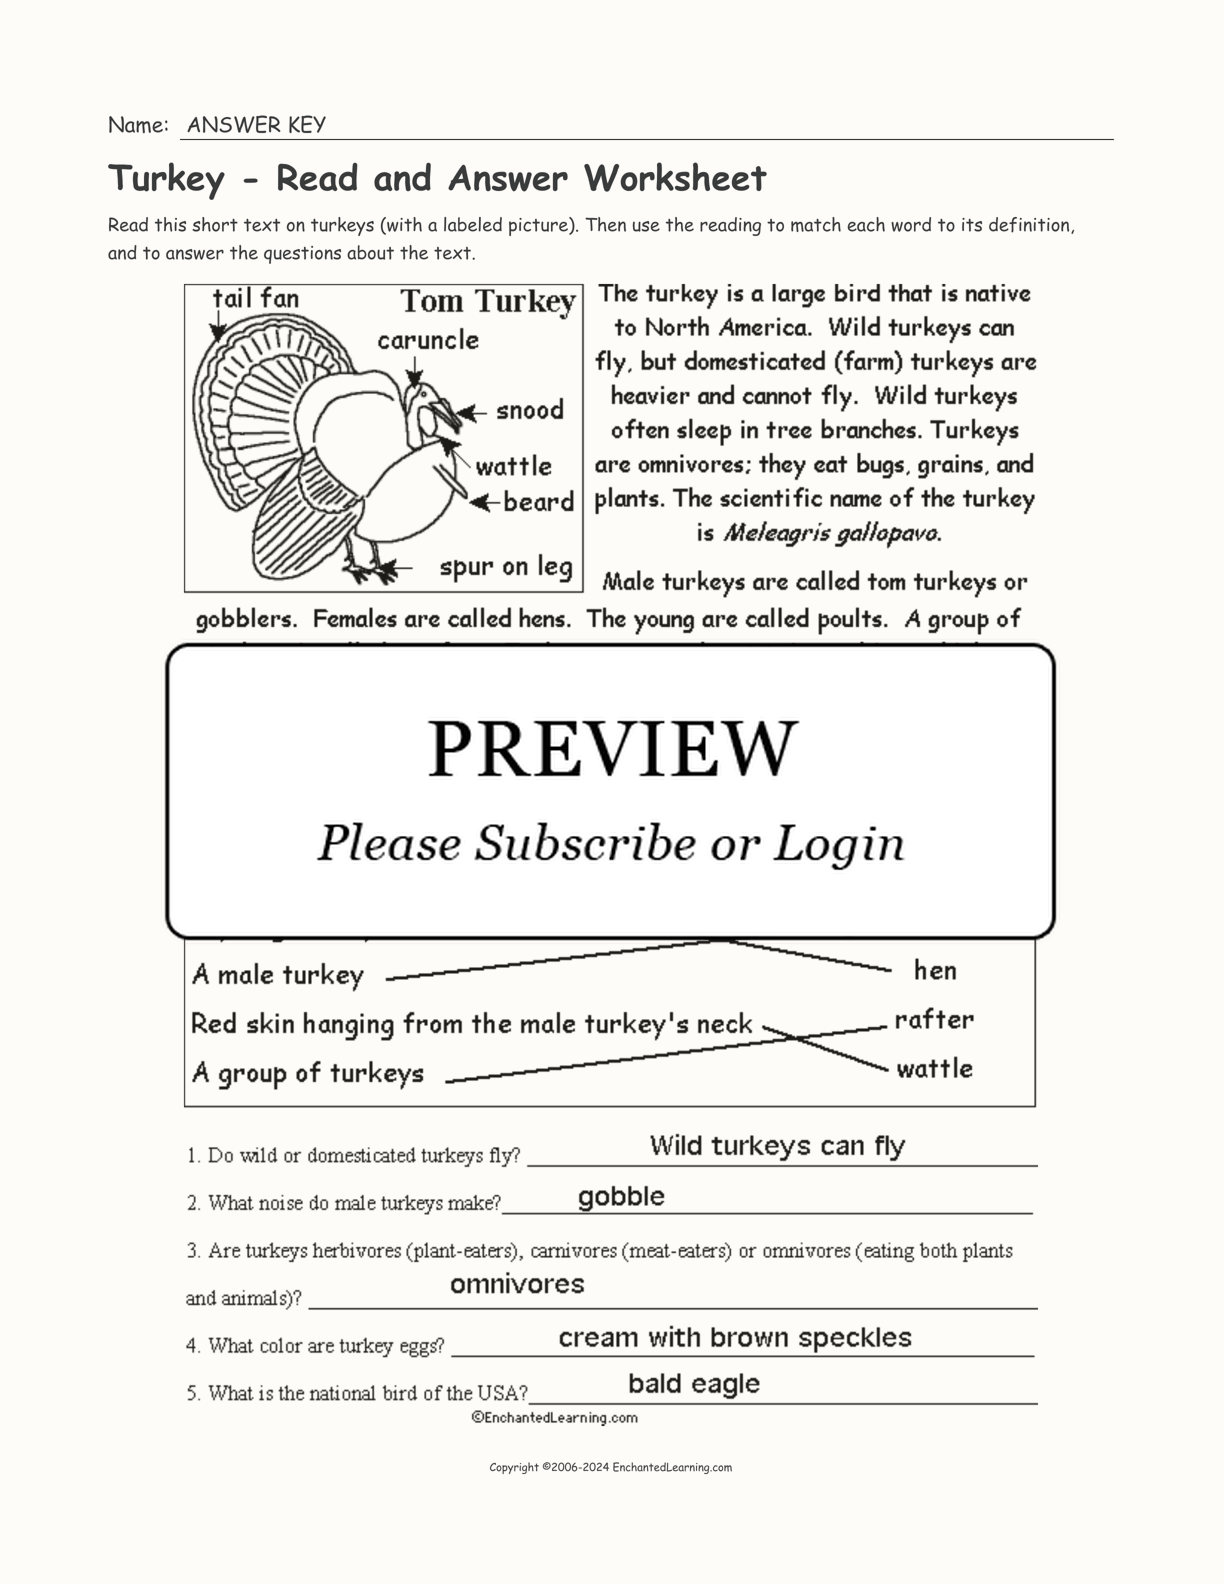 Turkey - Read and Answer Worksheet interactive worksheet page 2